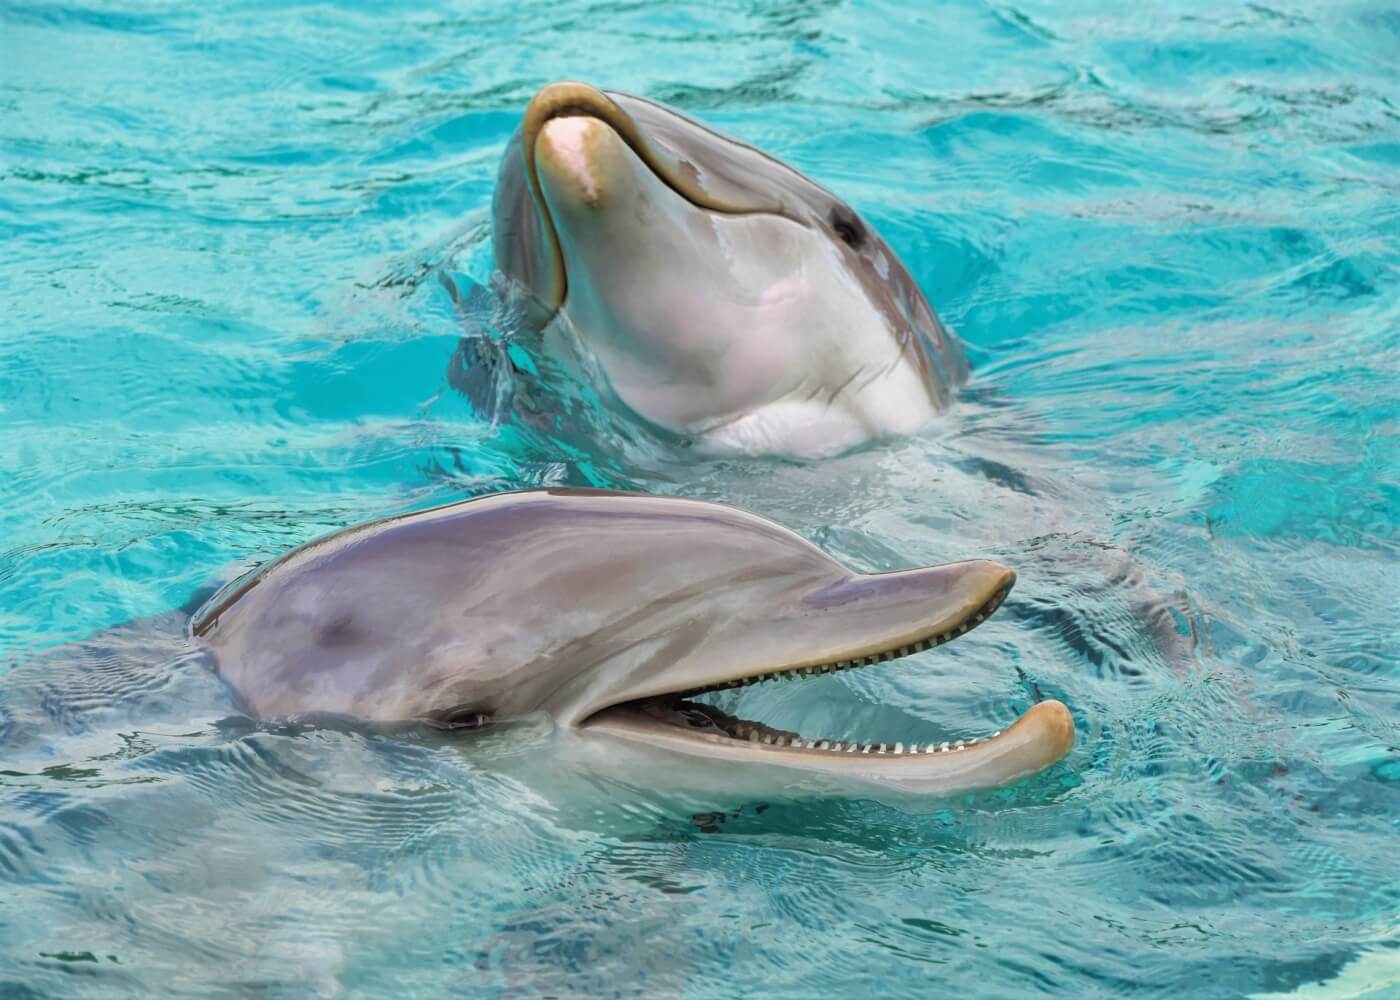 Two dolphins swim in bright blue water